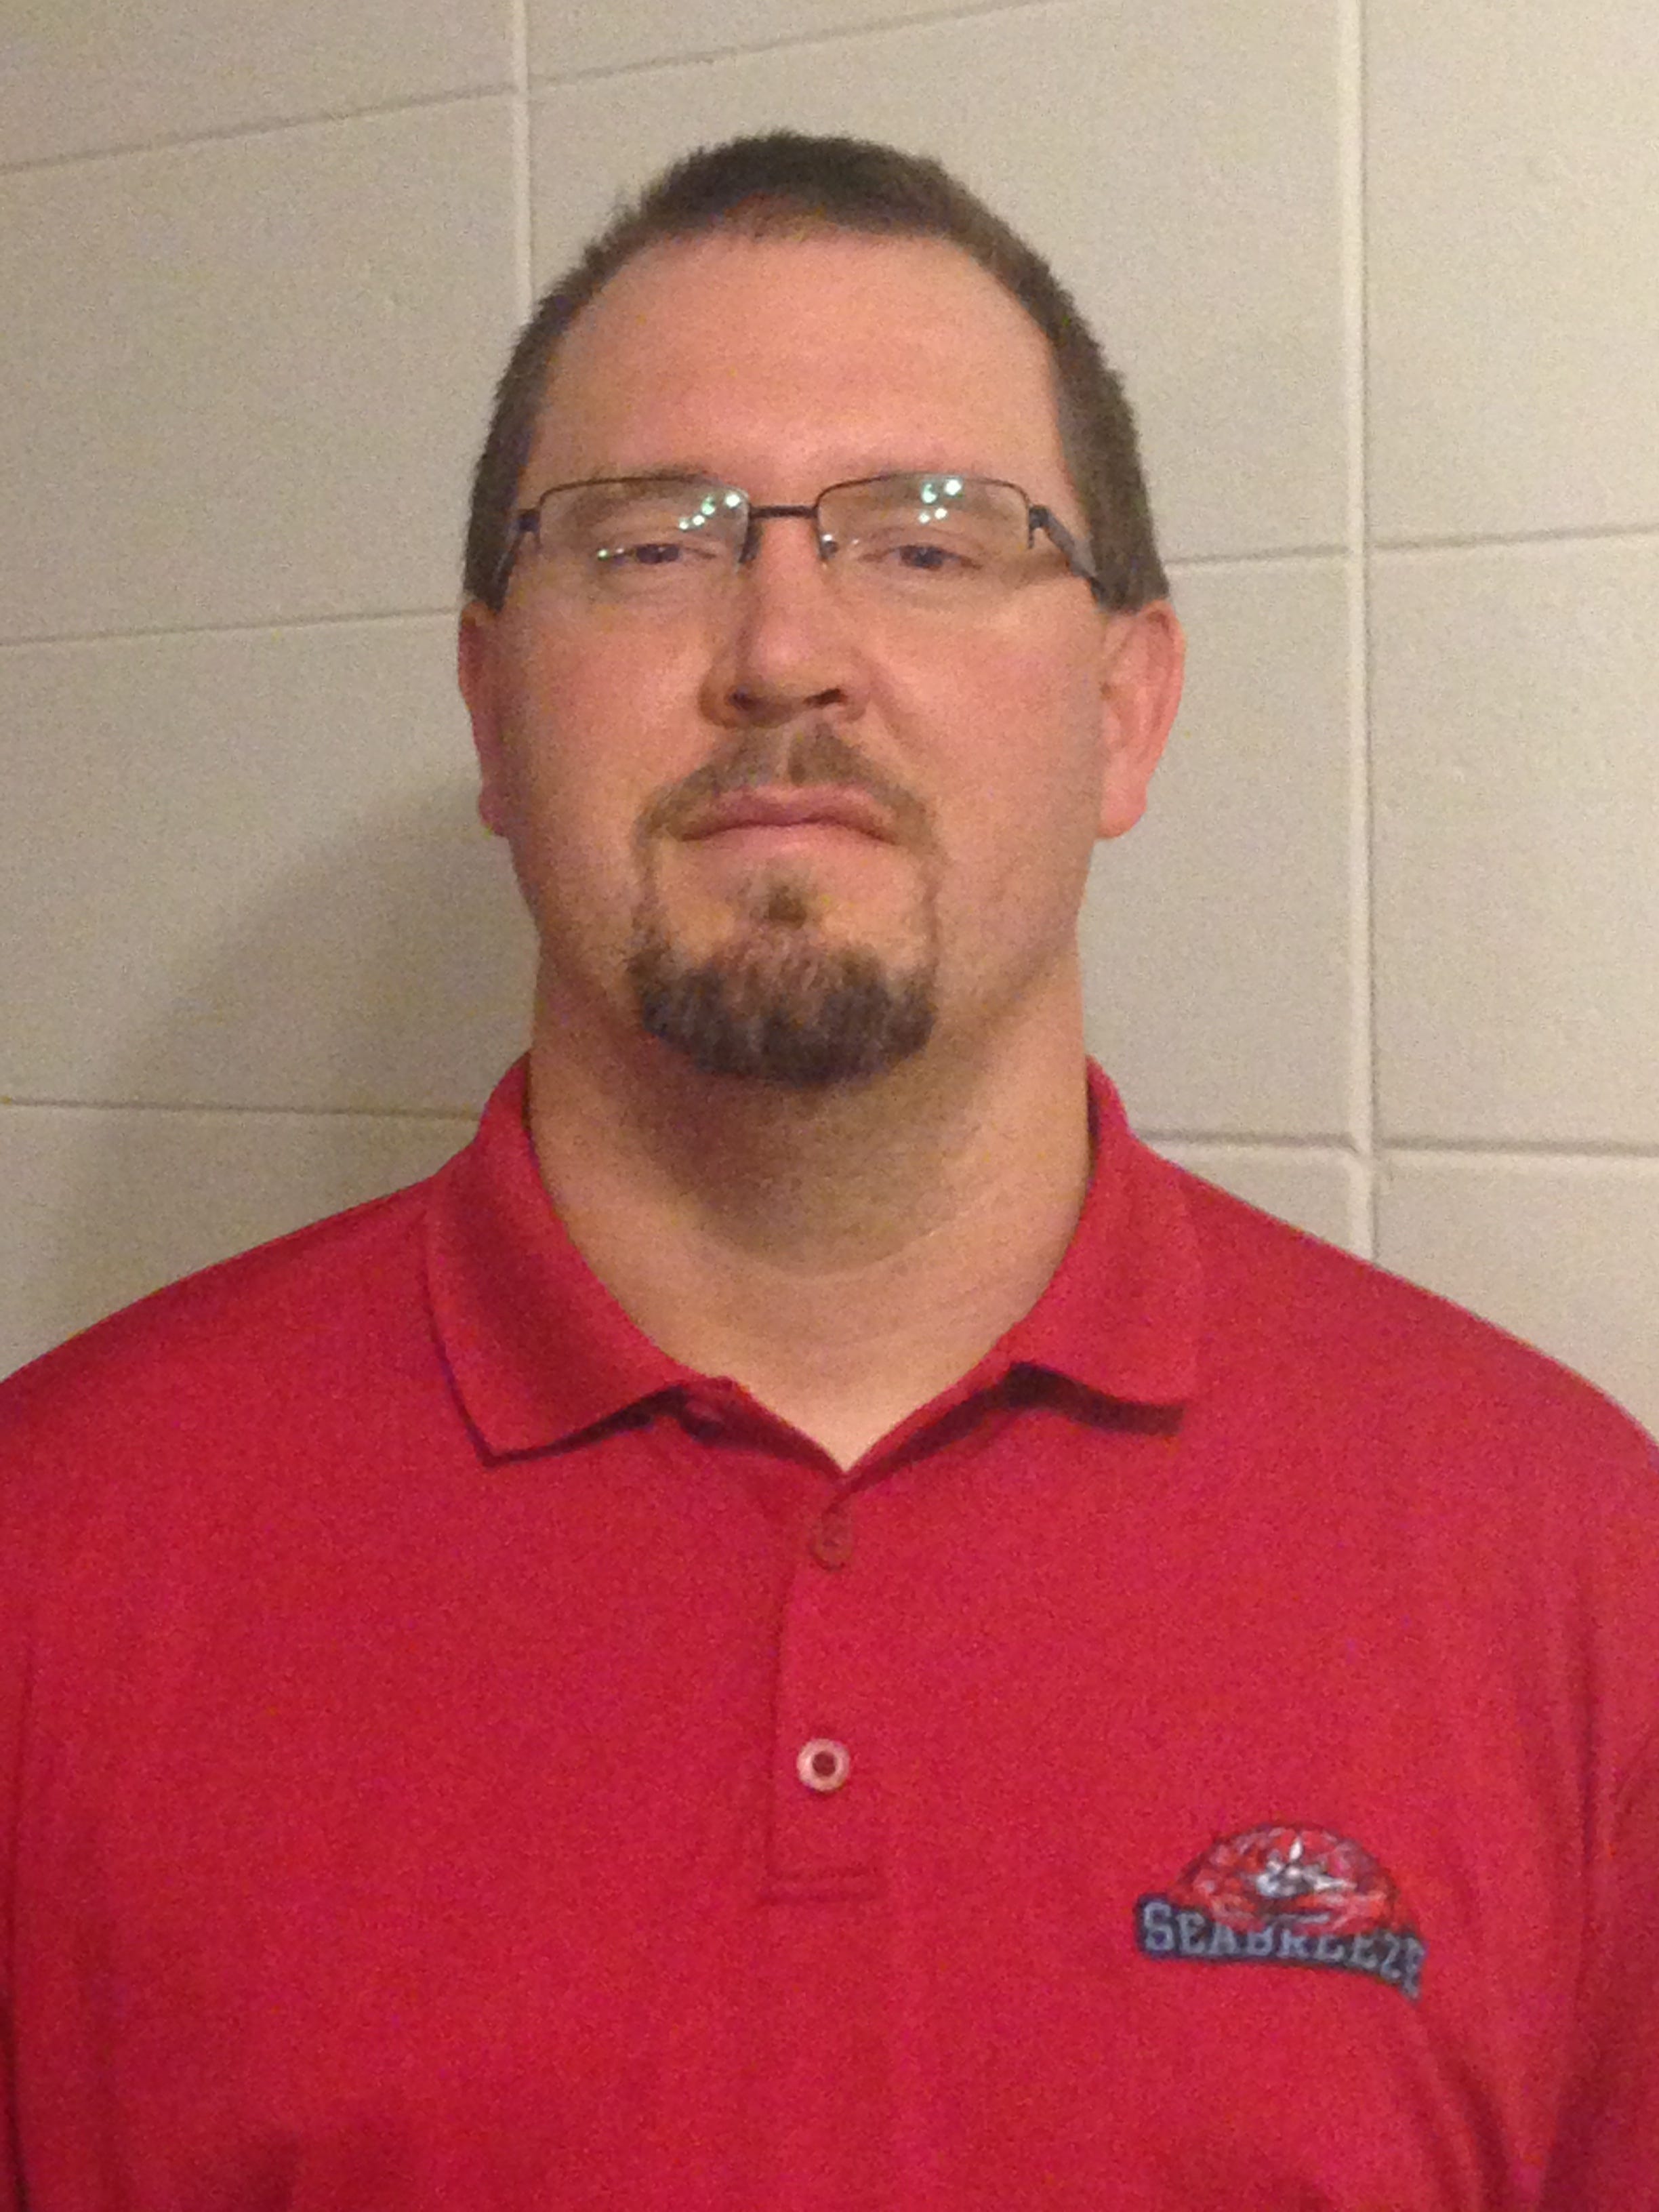 Coke resigns after 3 years as Seabreeze's football coach